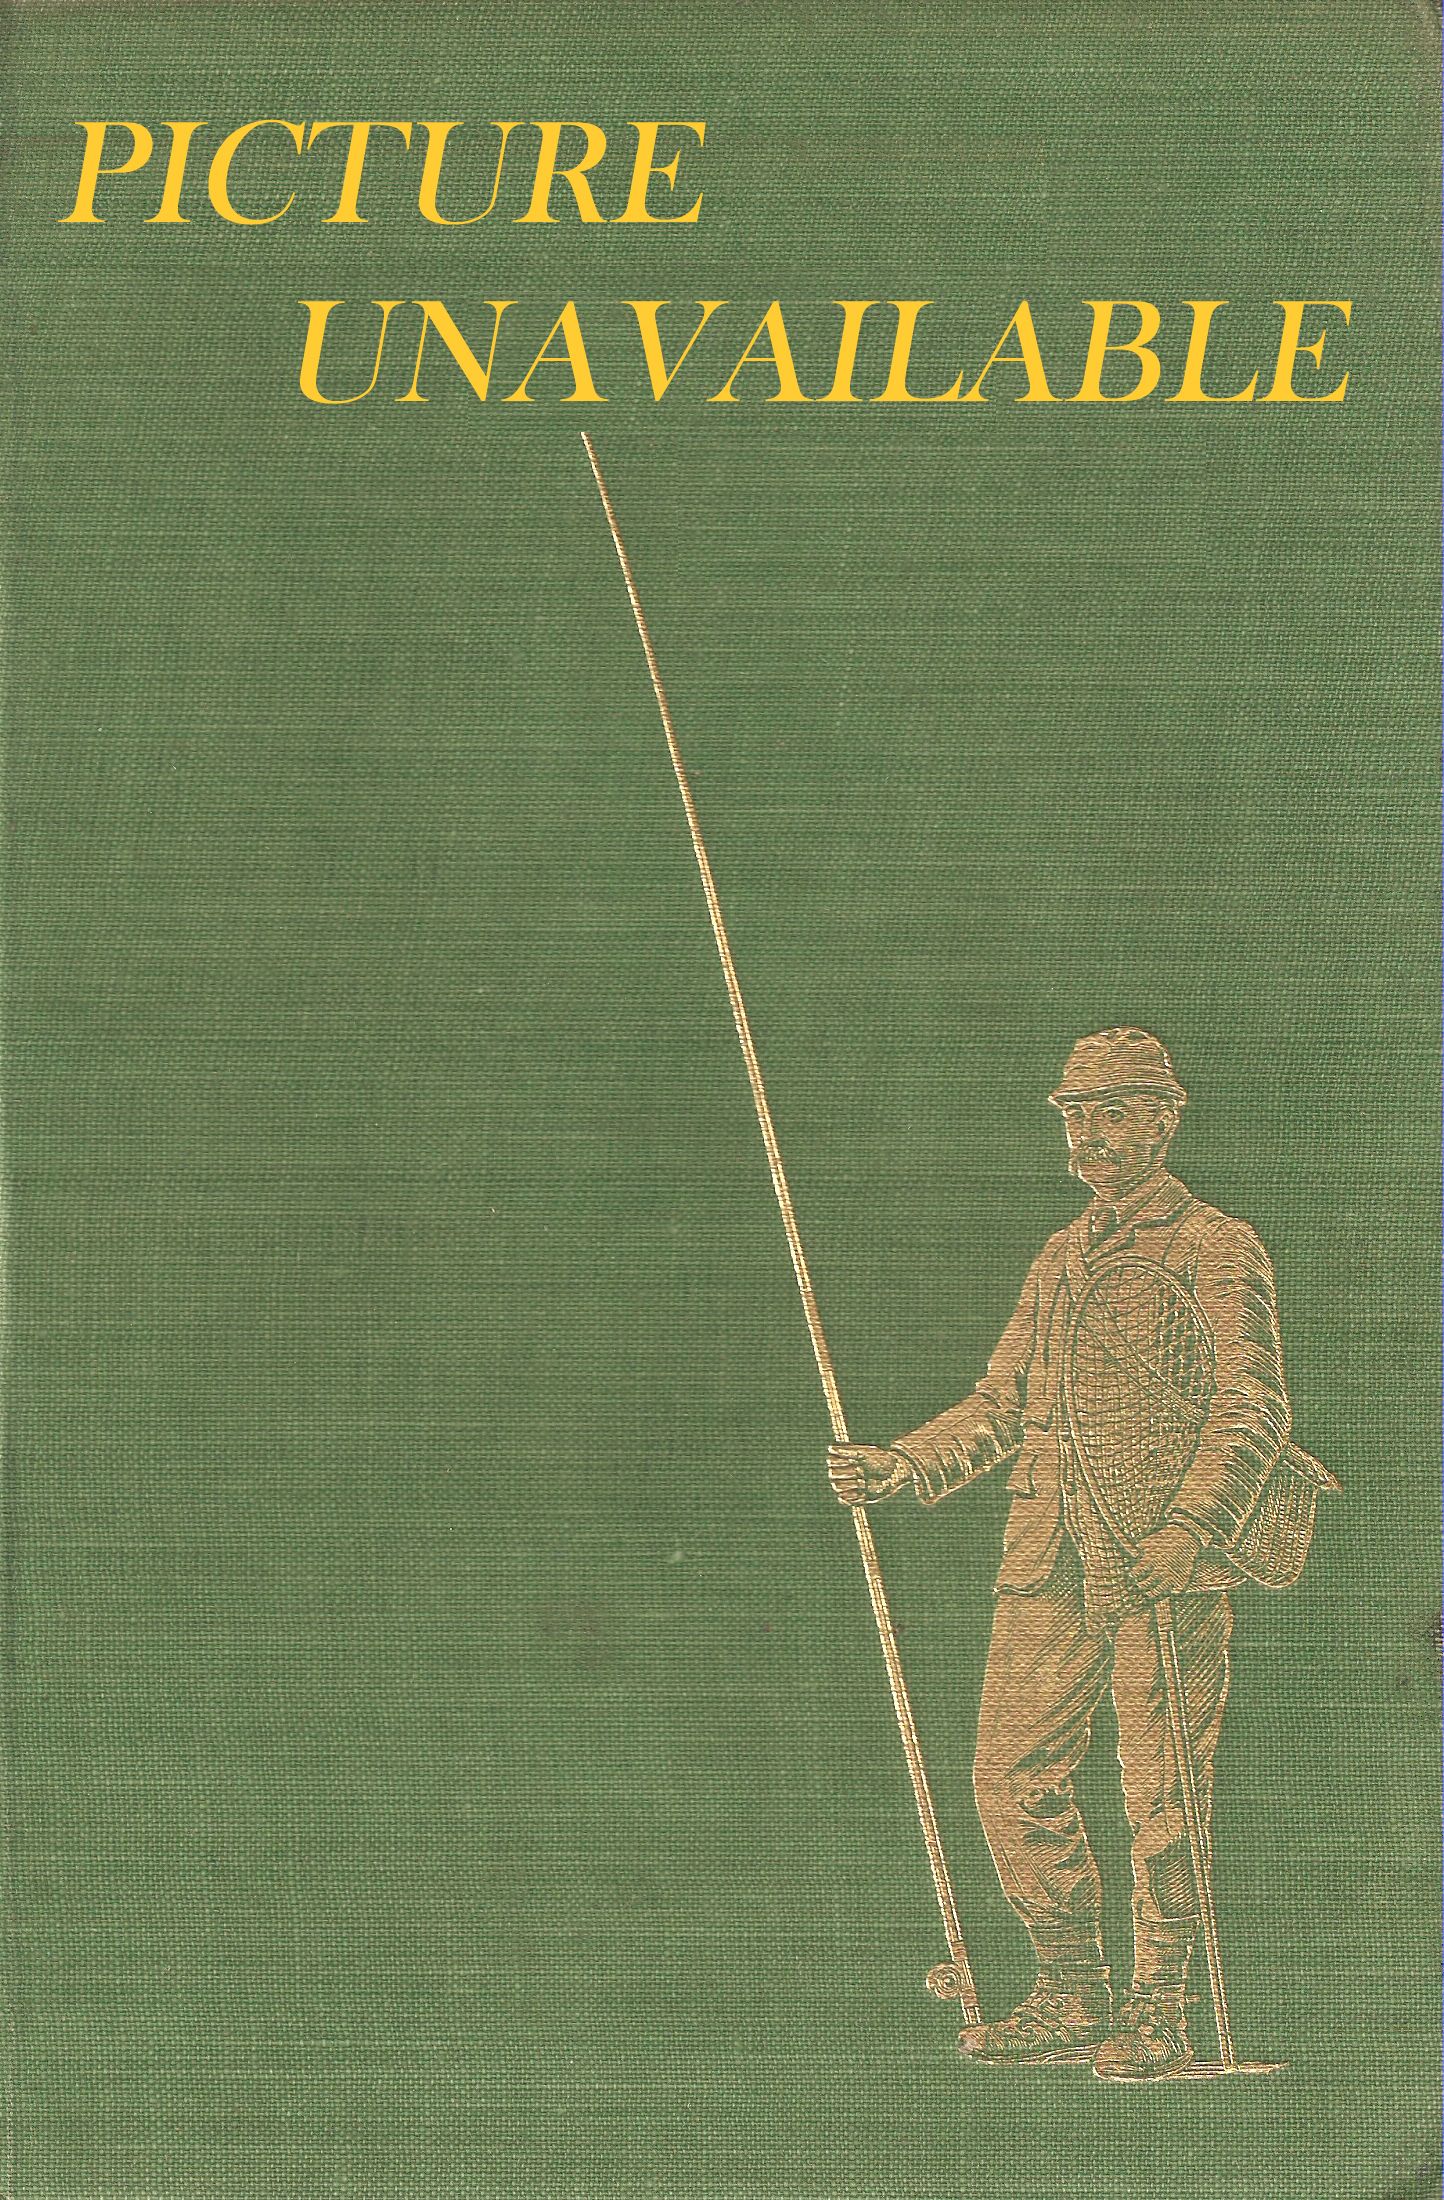 FISHING WITH THE EXPERTS: A NEW LOOK AT THE WONDERFUL WORLD OF ANGLING.  Edited by Charles Wade.